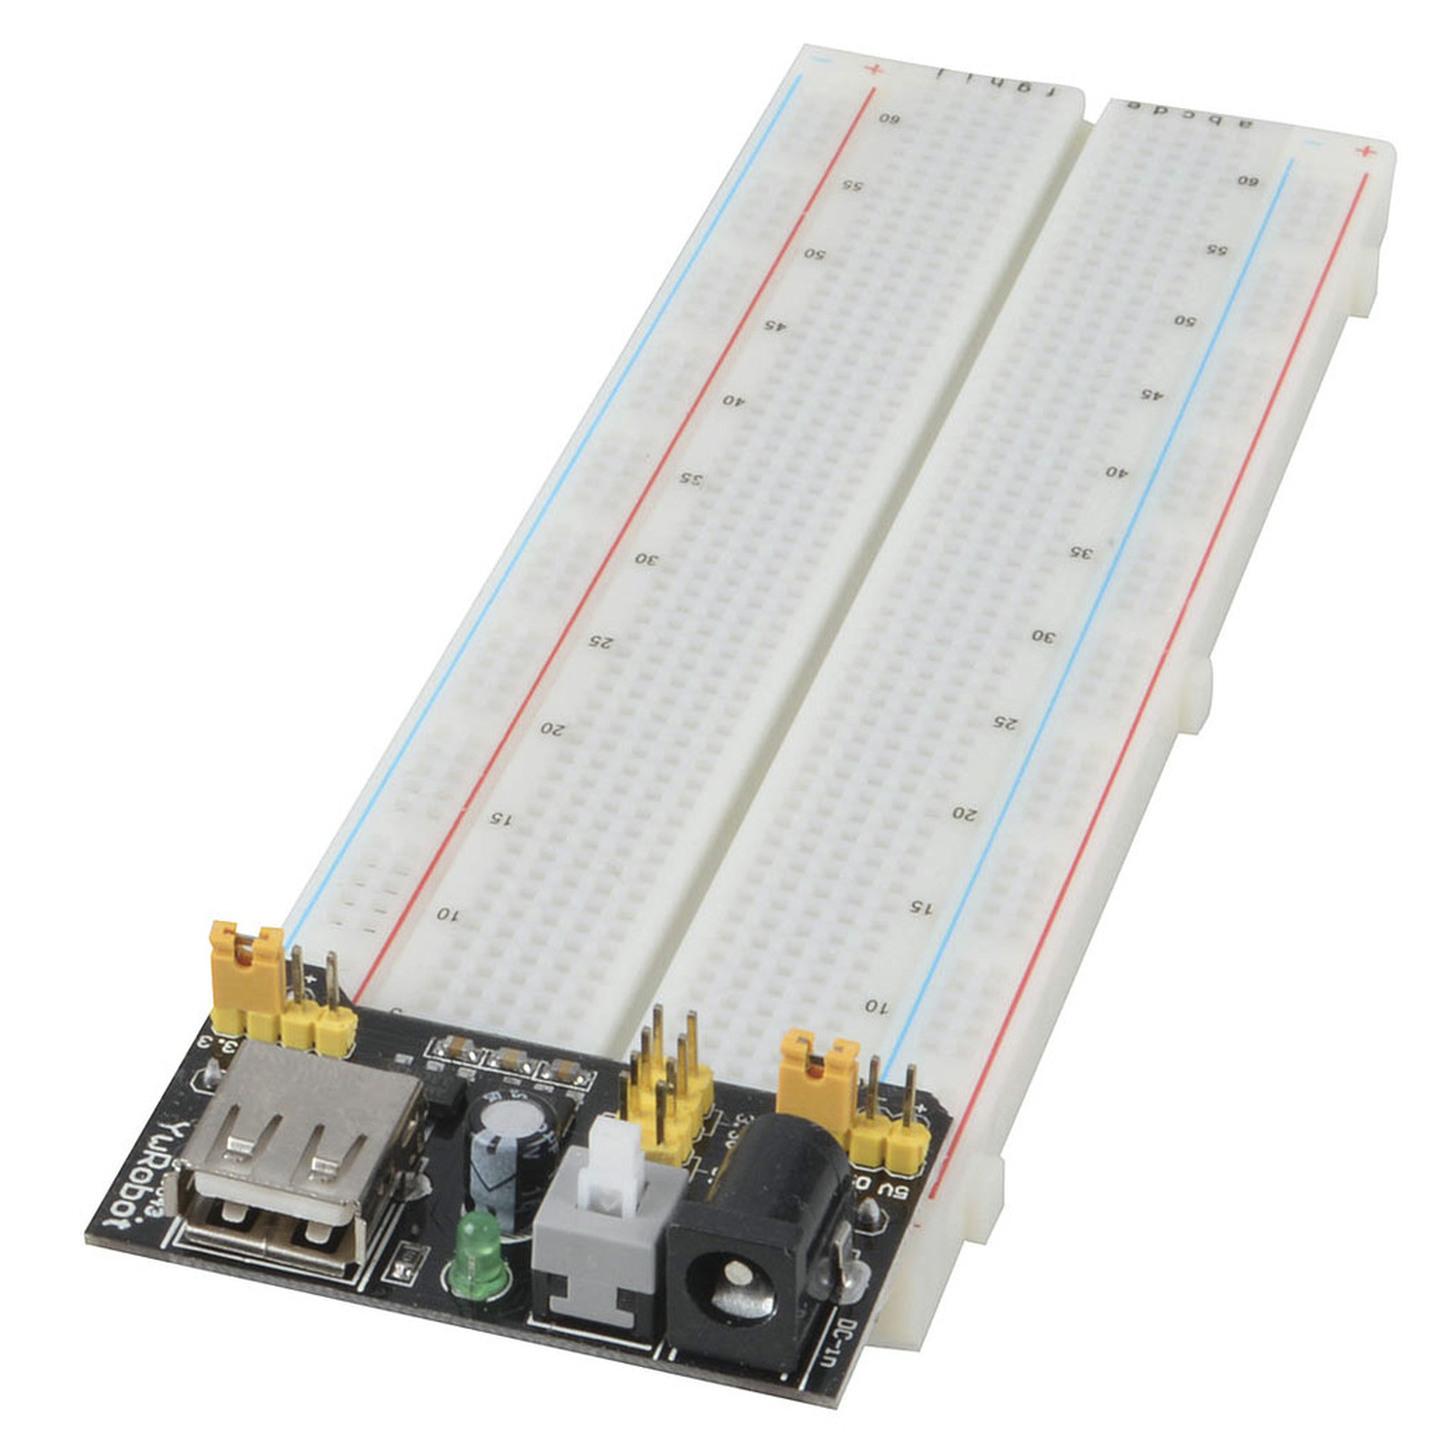 Solderless Breadboard with Power and I/O Breakout Board